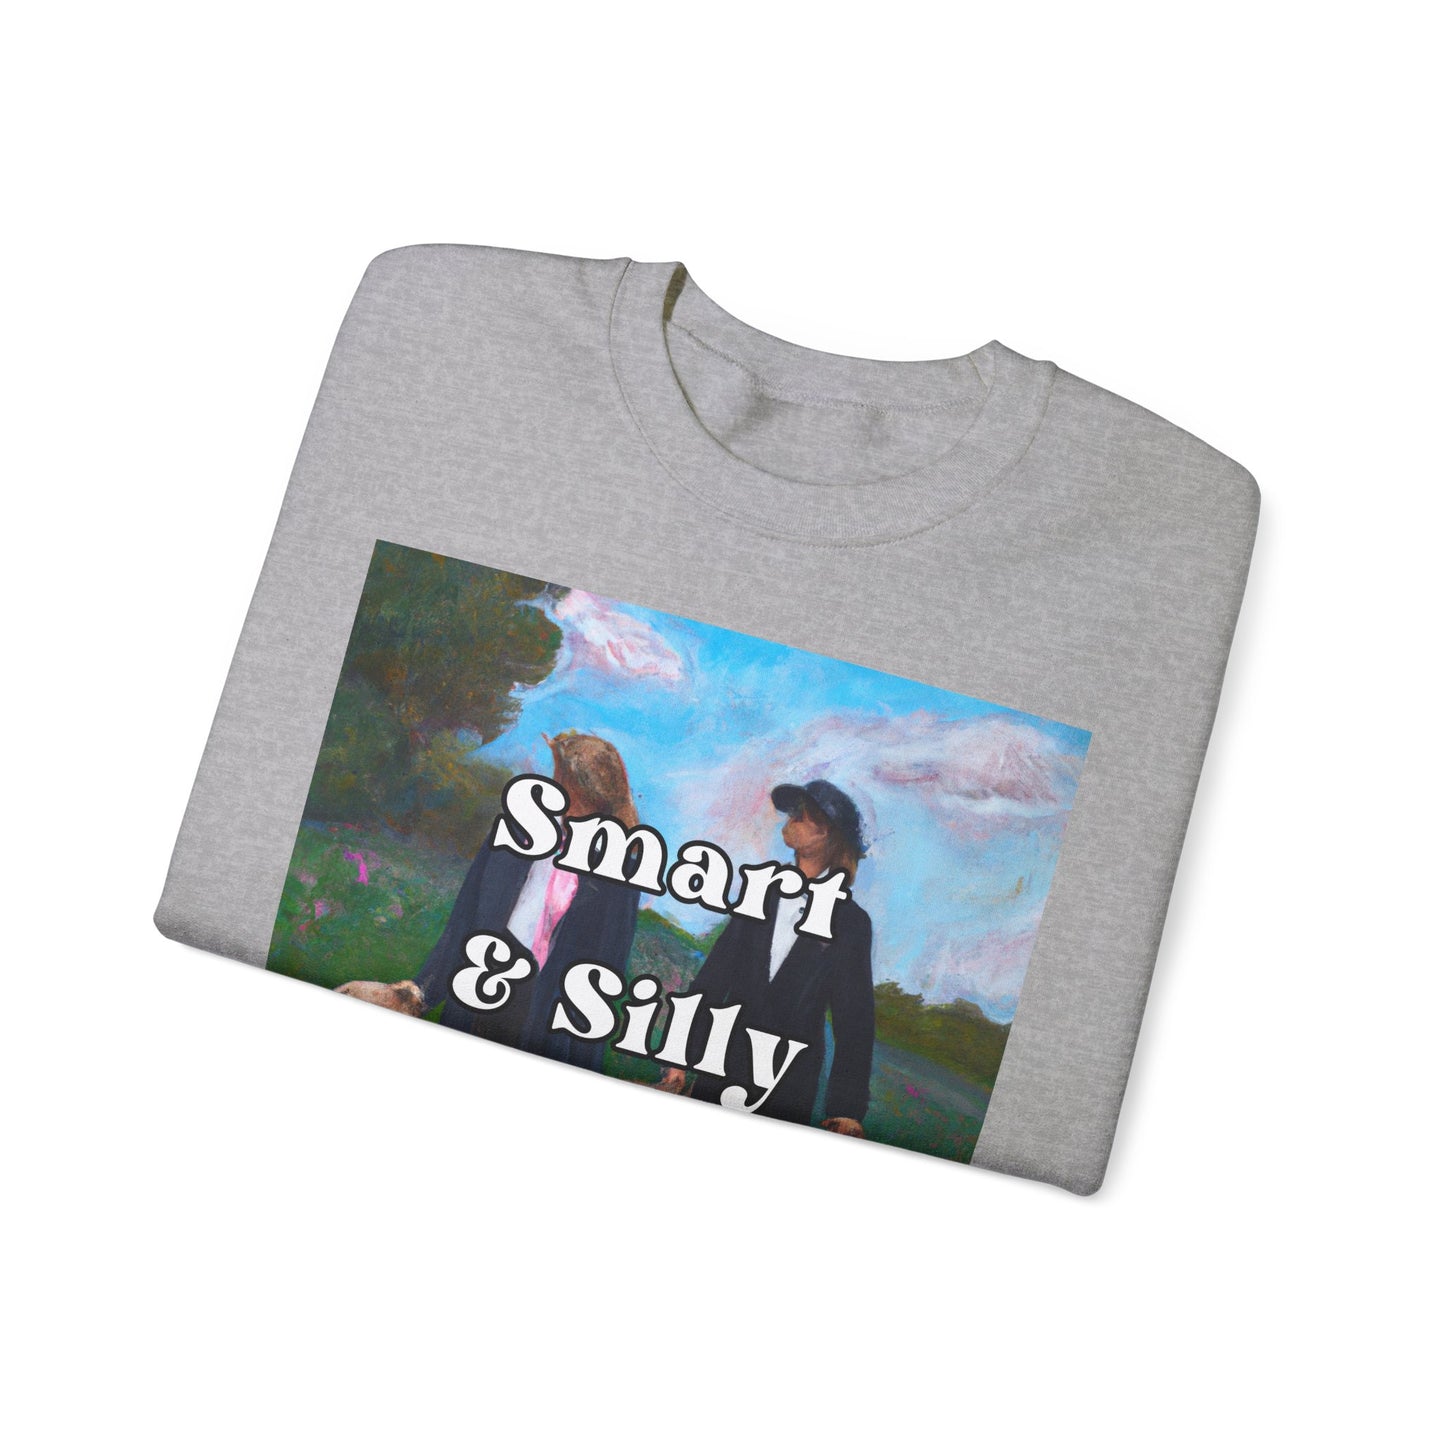 Smart and Silly - sweatshirt x Sarah Words Collection